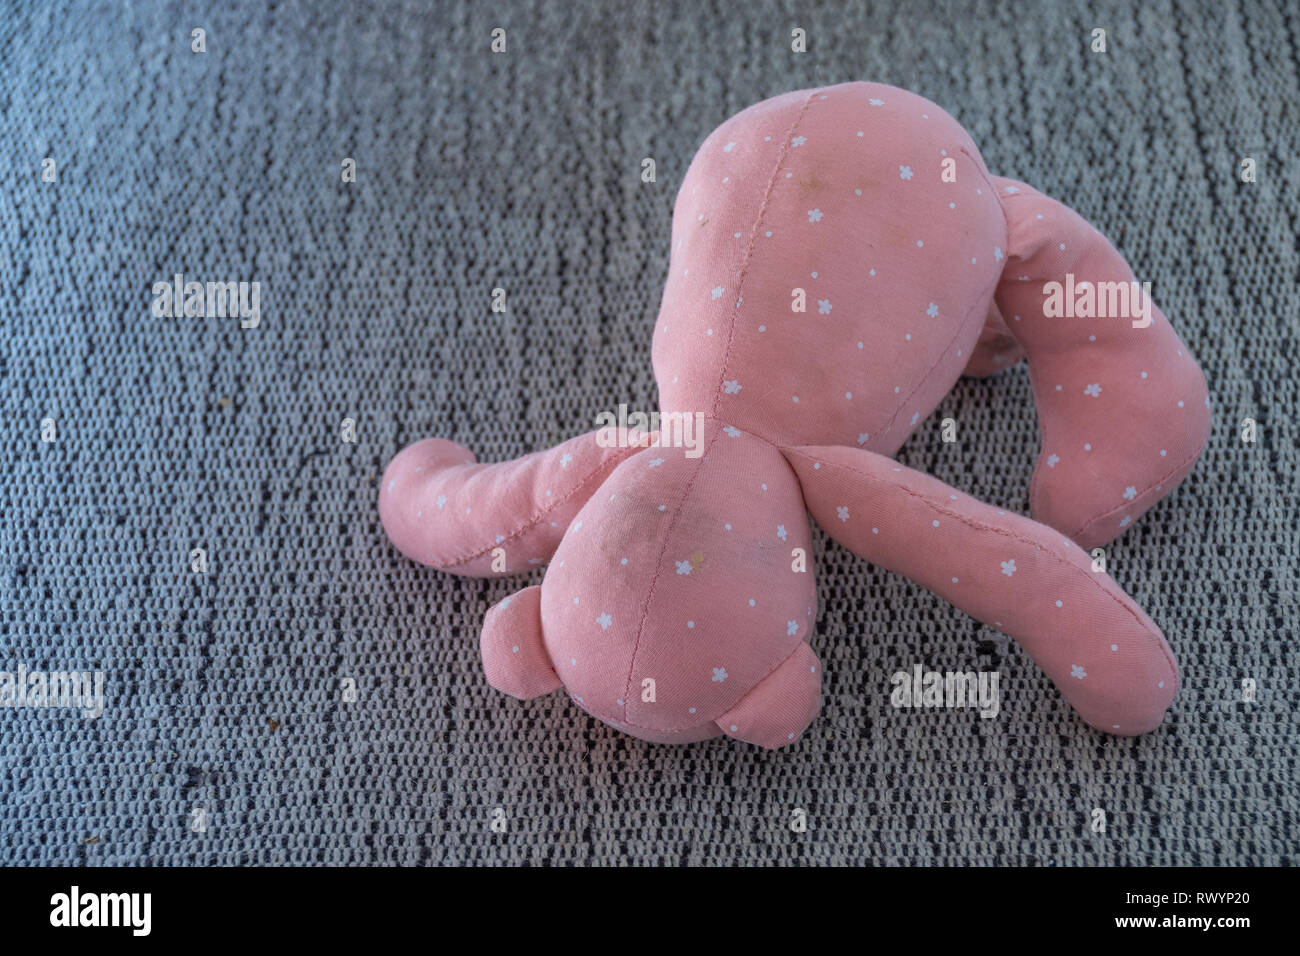 Discarded child's old soft toy isolated on a grey carpet image with copy space Stock Photo